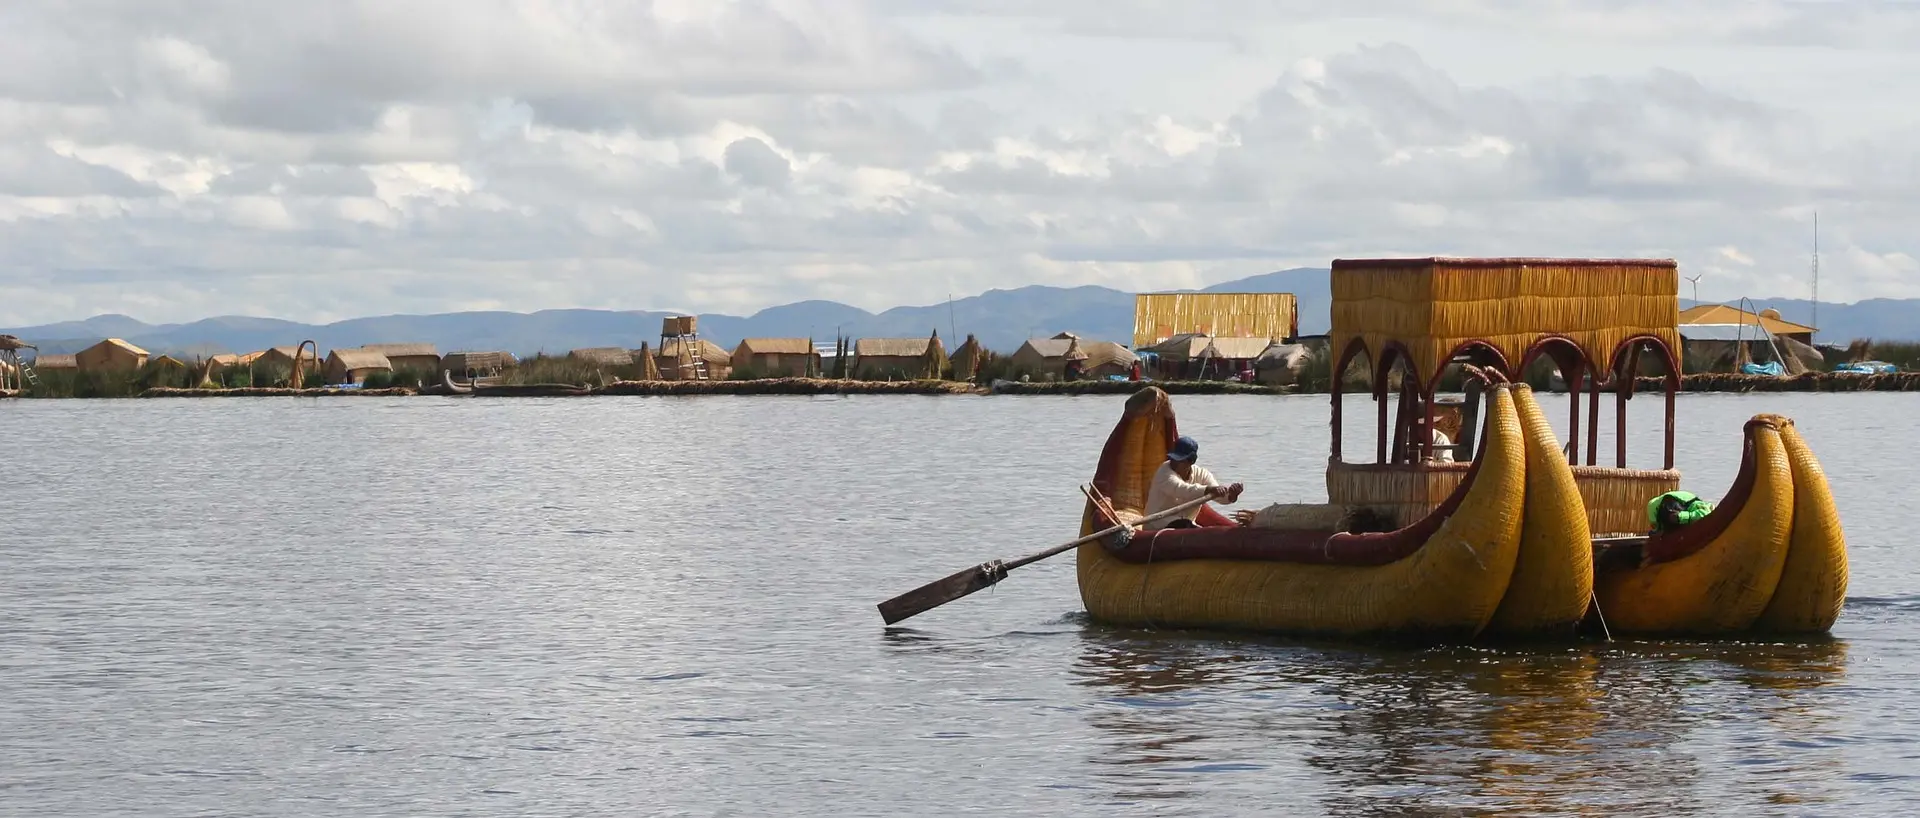 Uros boat on Lake Titicaca